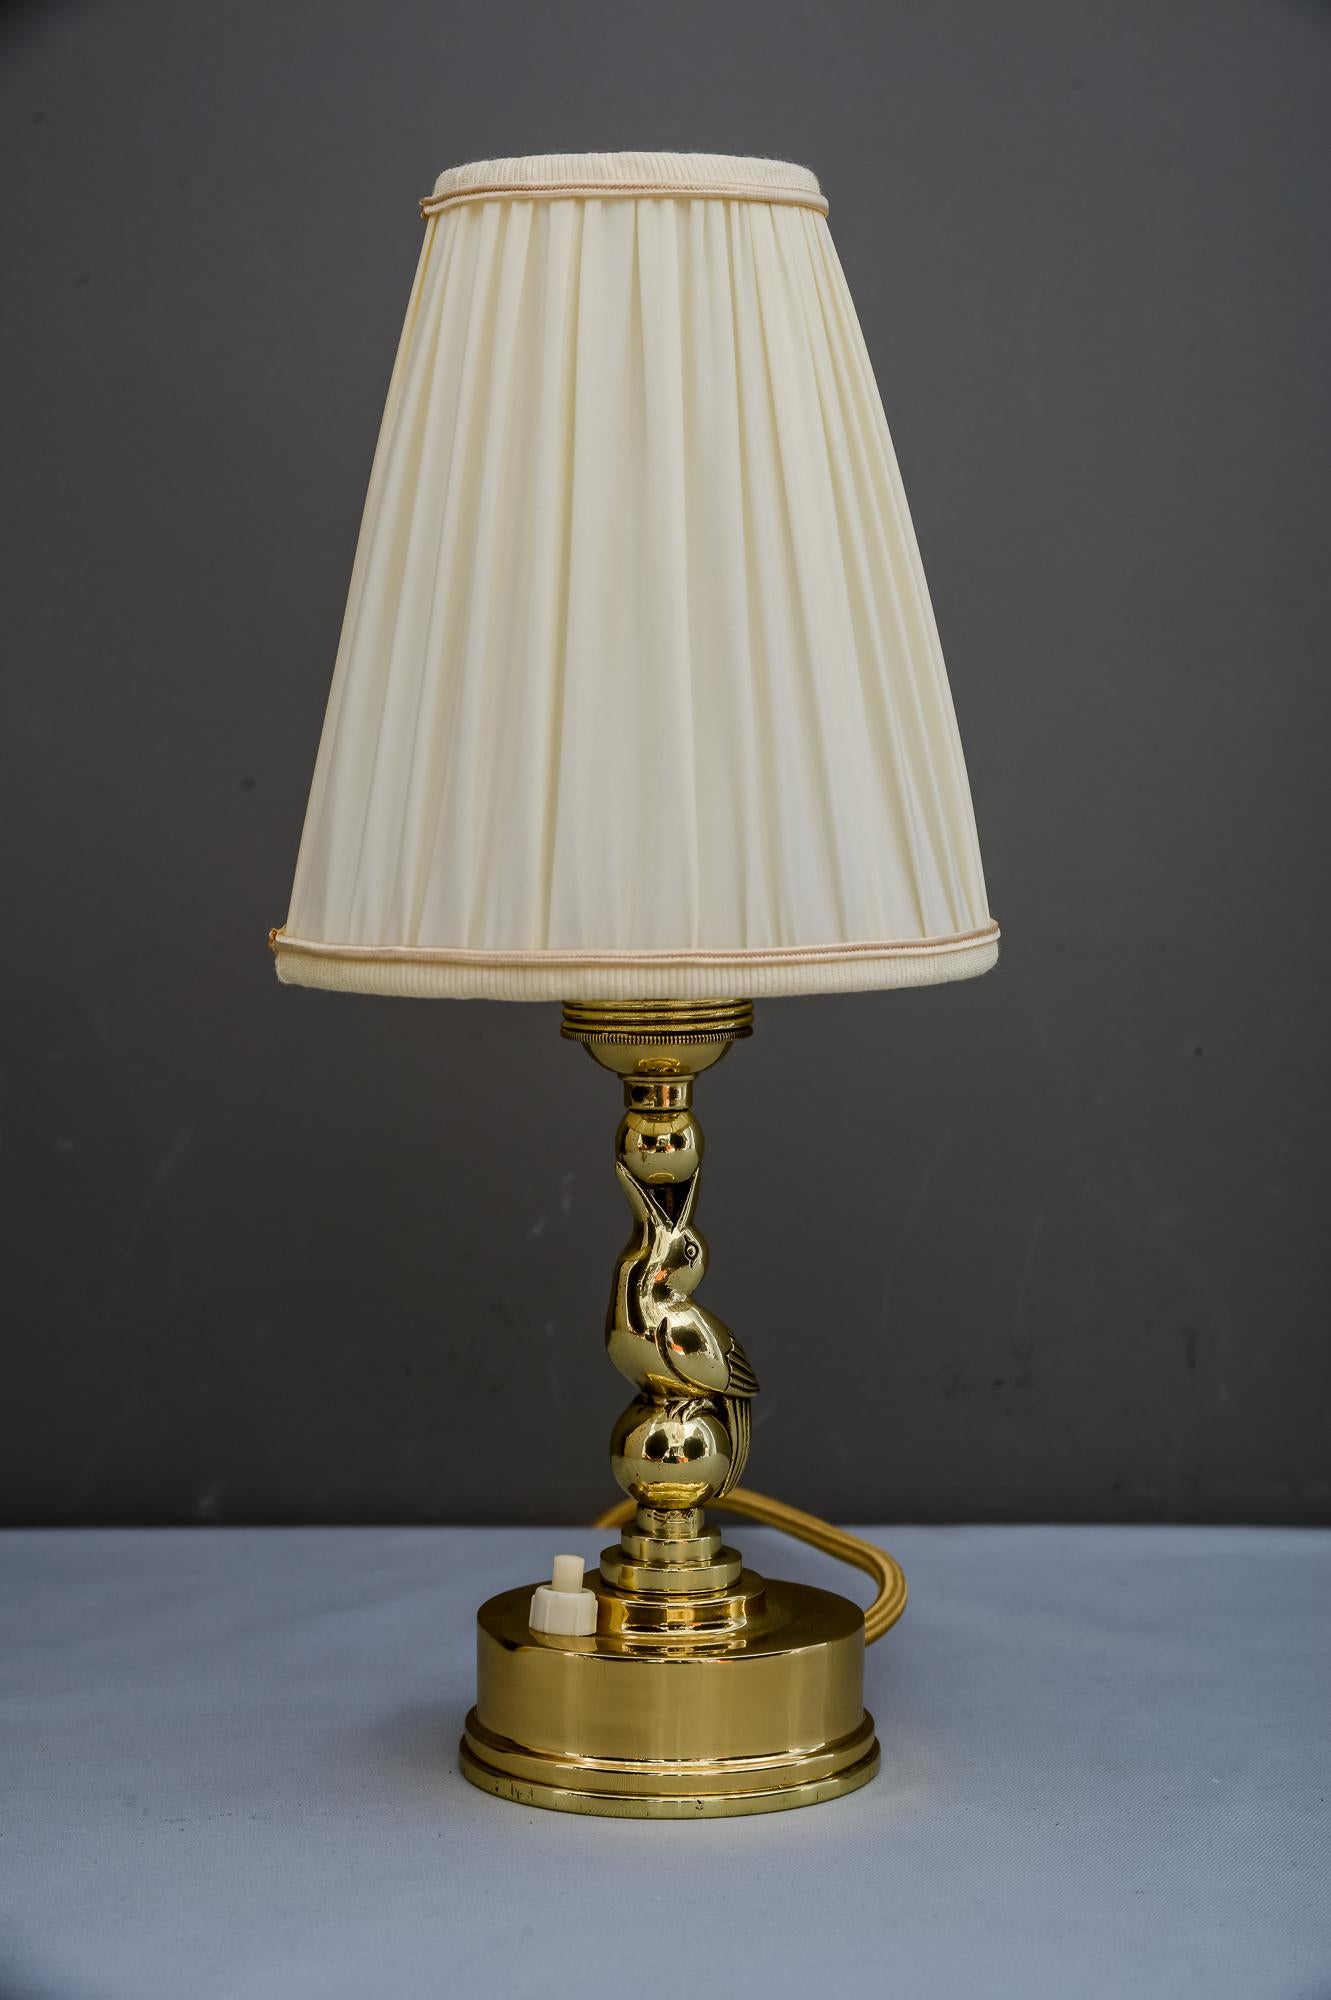 Small Art Deco table lamp, Vienna, 1920s
Polished and stove enameled
Shade is replaced (new).